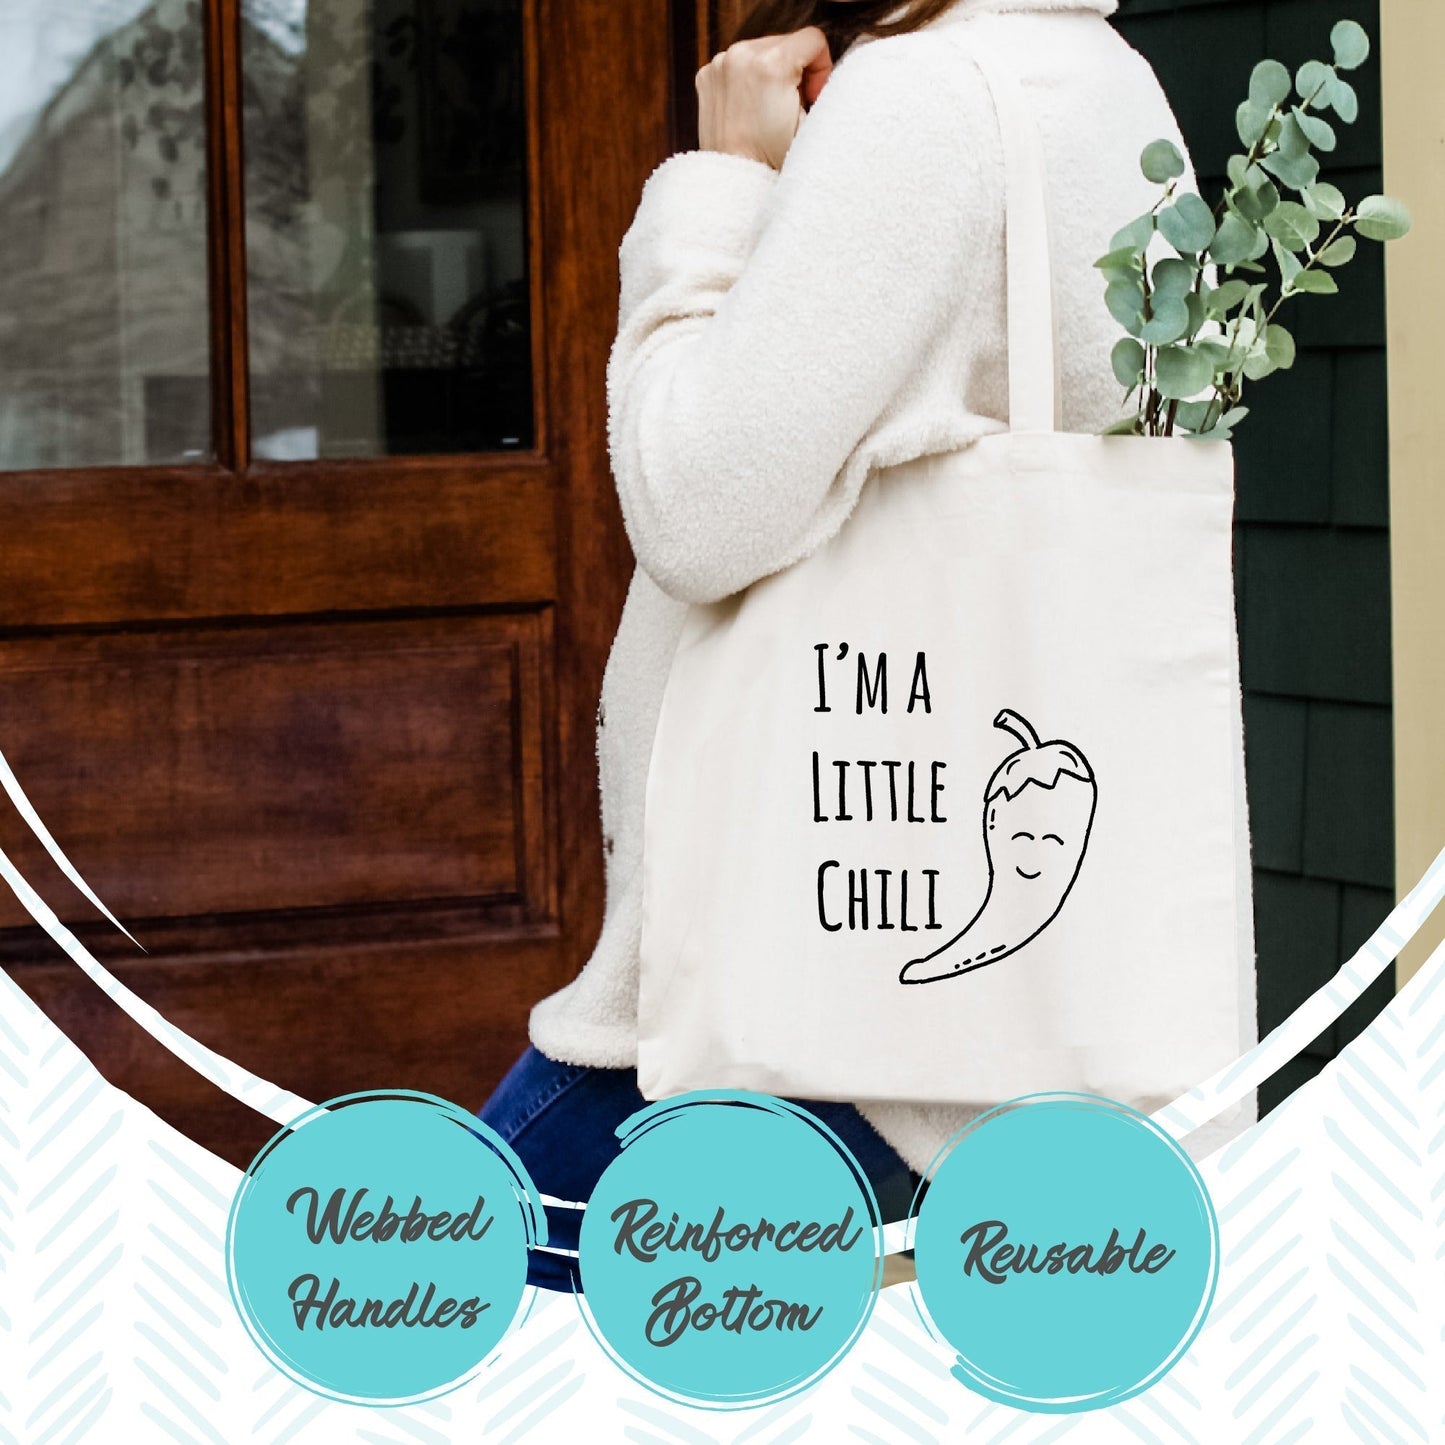 Dishes Don't Be Sad, No One Is Doing Me Either - Tote Bag - MoonlightMakers